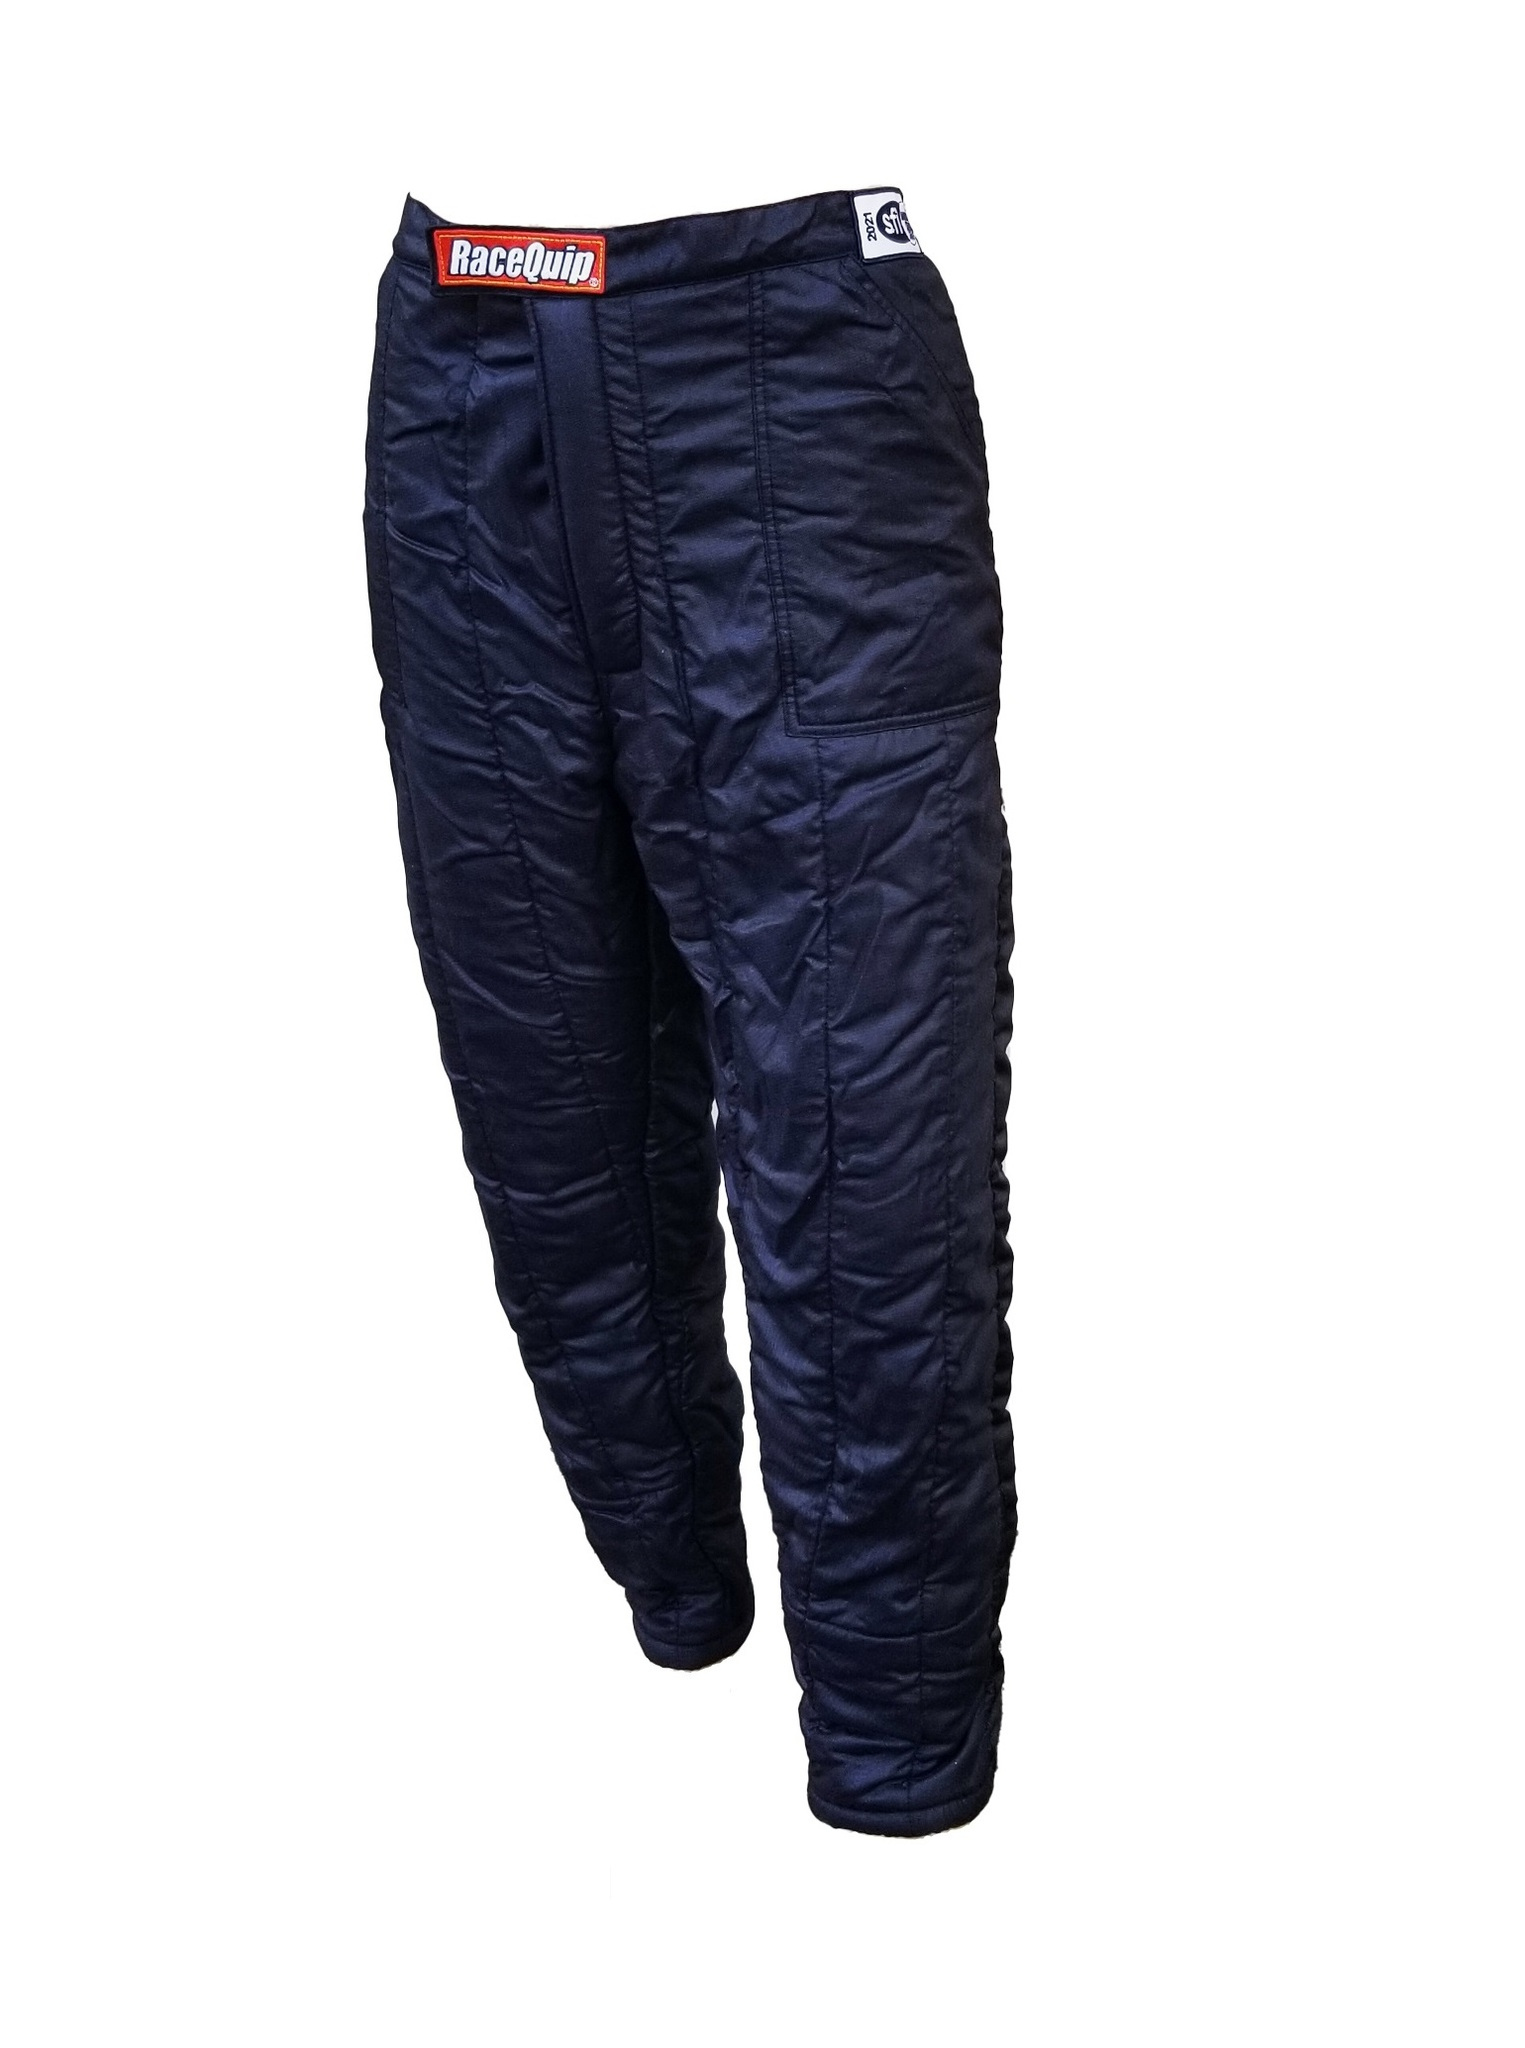 Racequip 91929929 Driving Pants, SFI 3.2A/15, Multiple Layer, Aramid Fabric / Nomex, Black, Small, Each